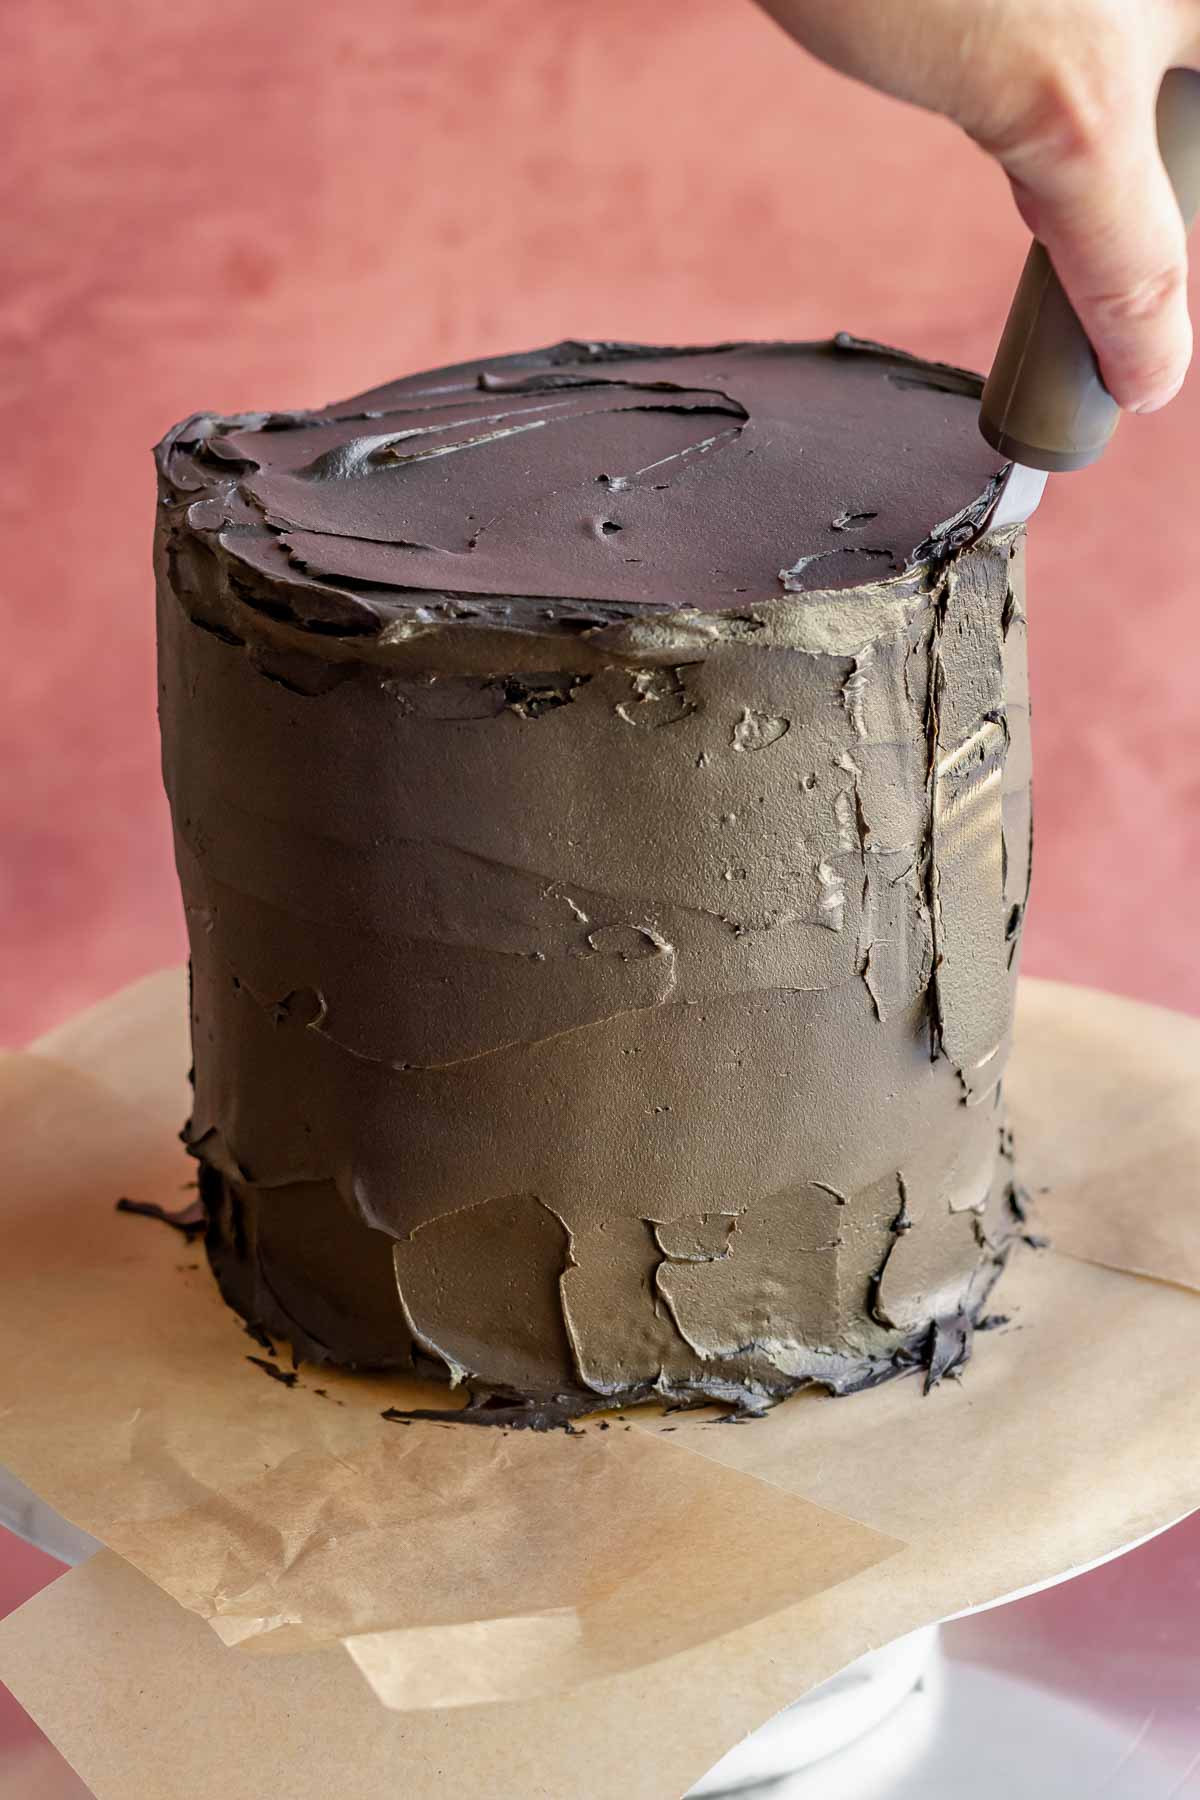 An offset spatula smooths frosting o the side of the cake.